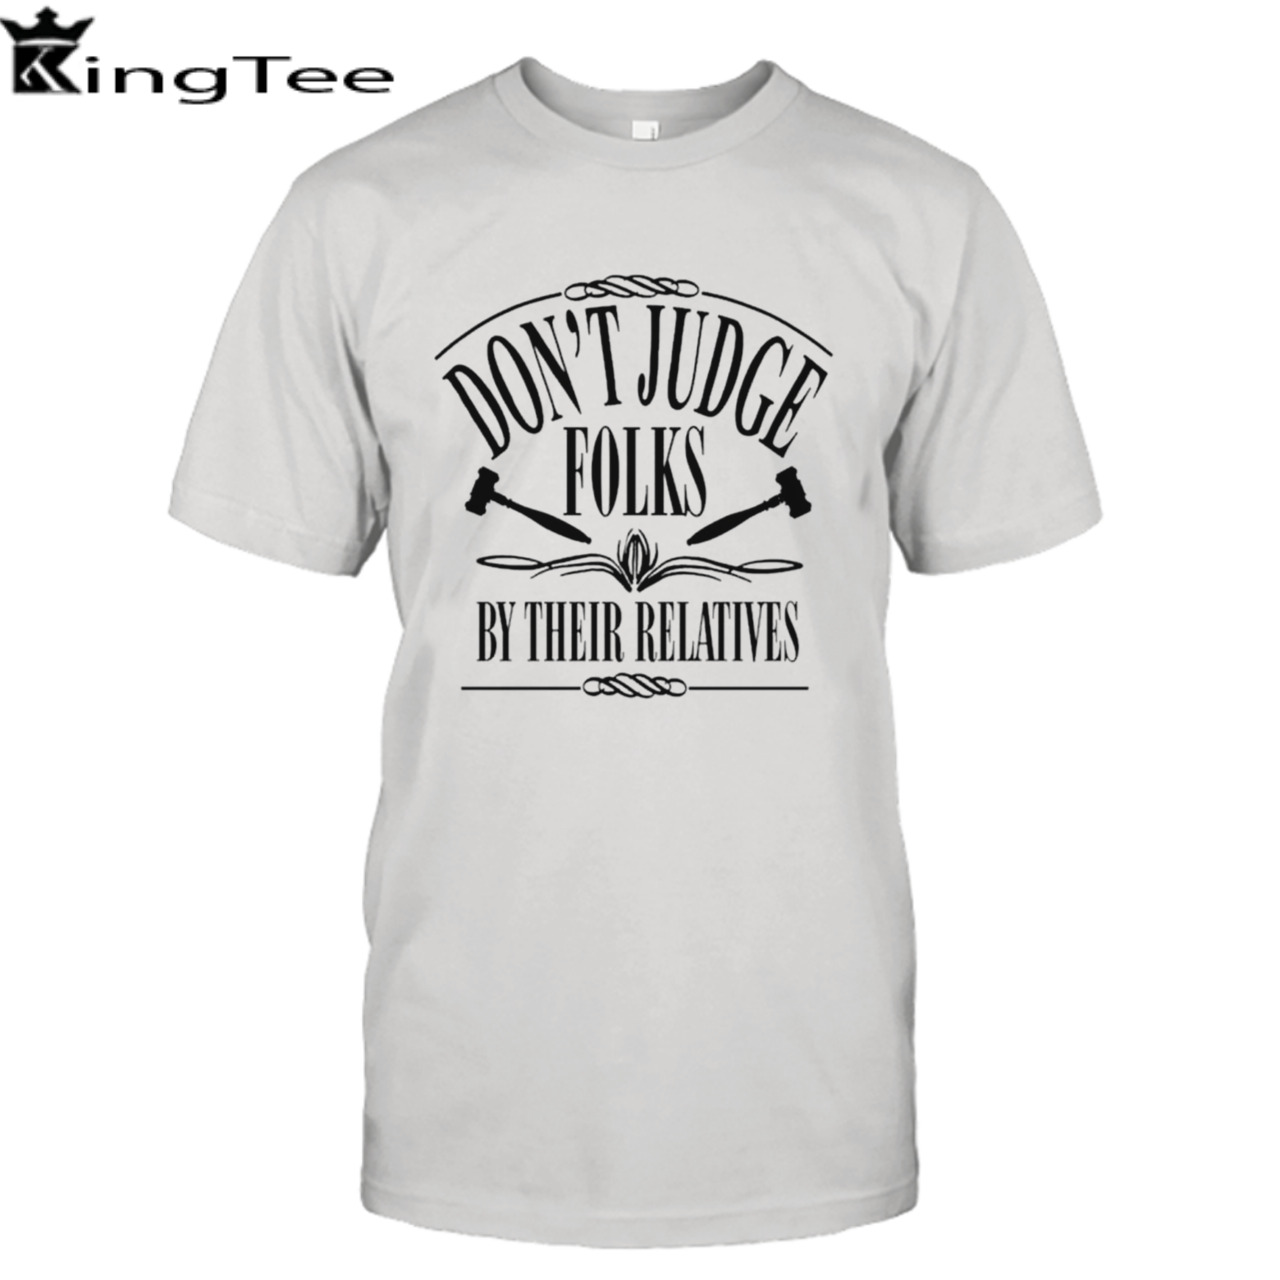 Don’t judge folks by their relatives shirt